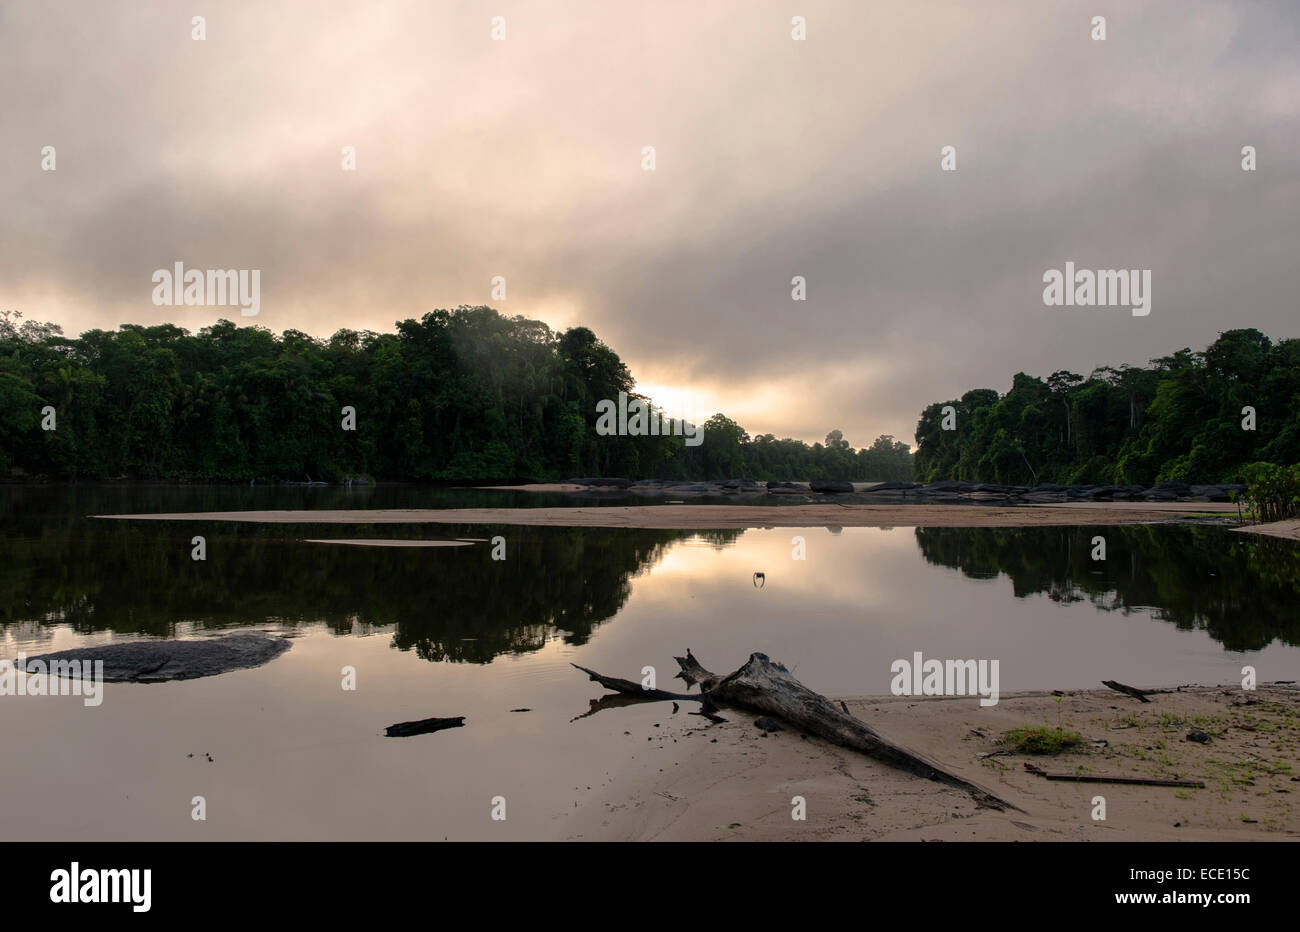 Serene tranquility at sunset: the Suriname River in Upper Suriname, a wild stream bordered by rainforest. Stock Photo